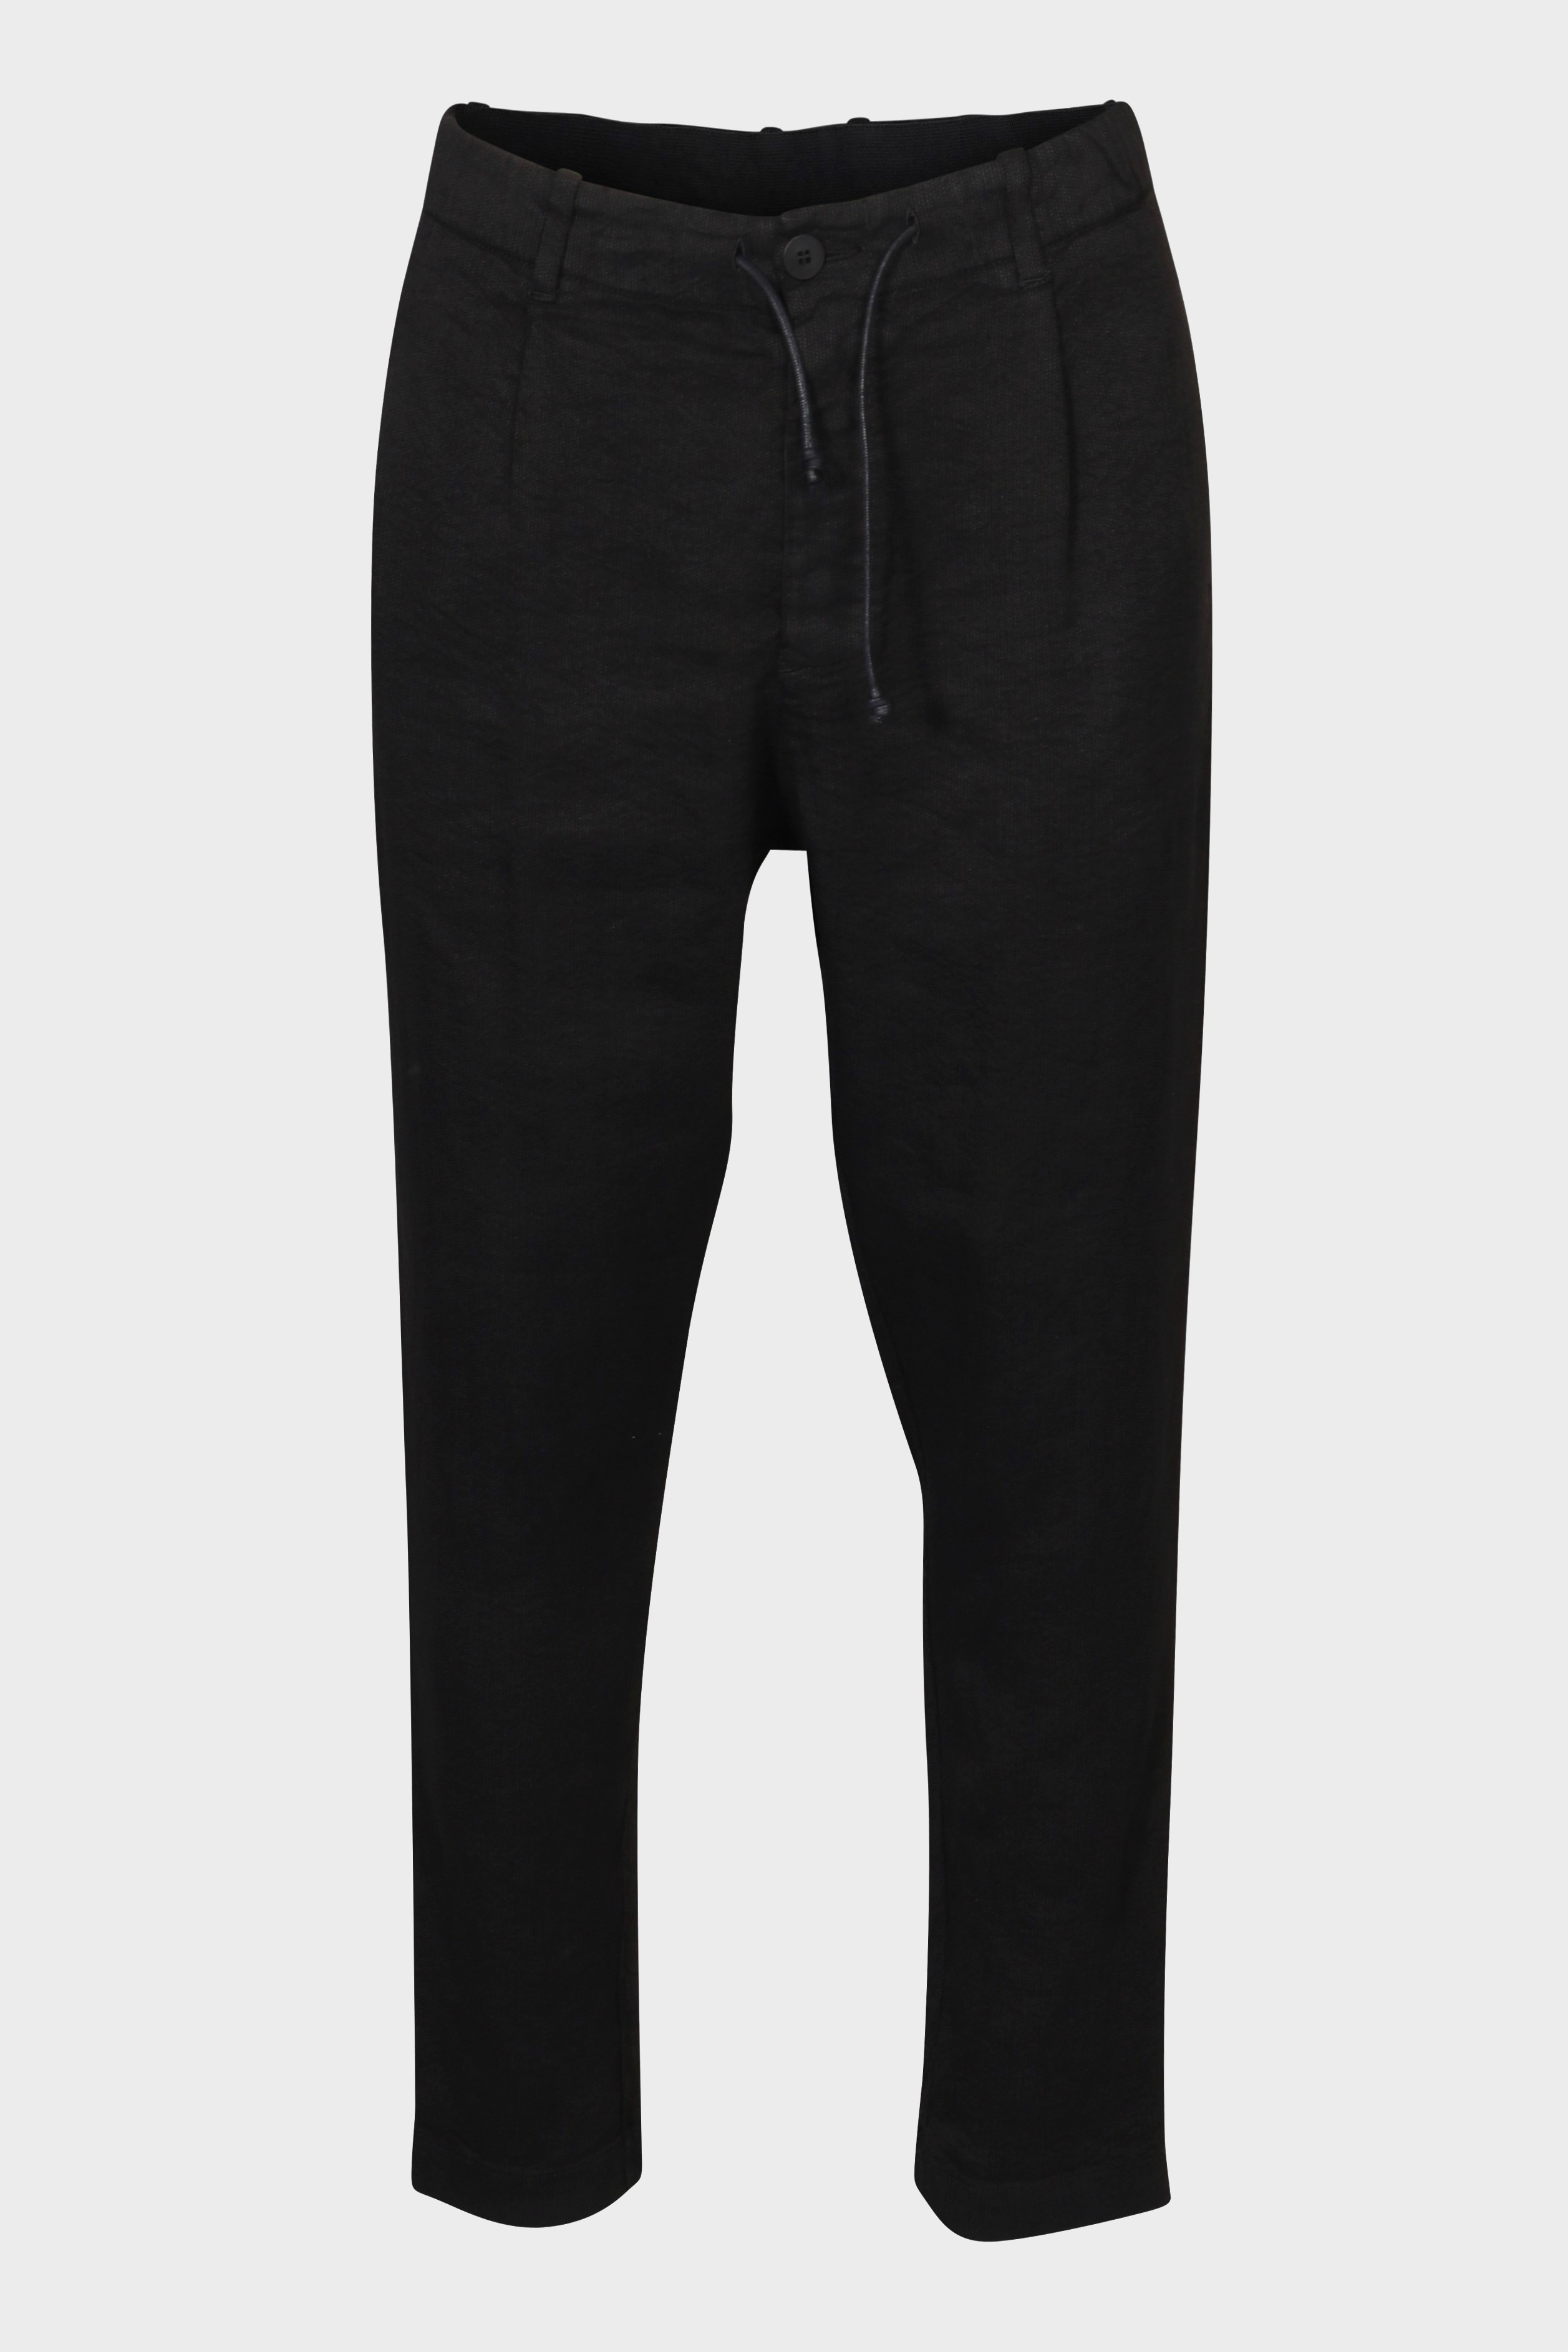 TRANSIT UOMO Structure Stretch Pant in Black